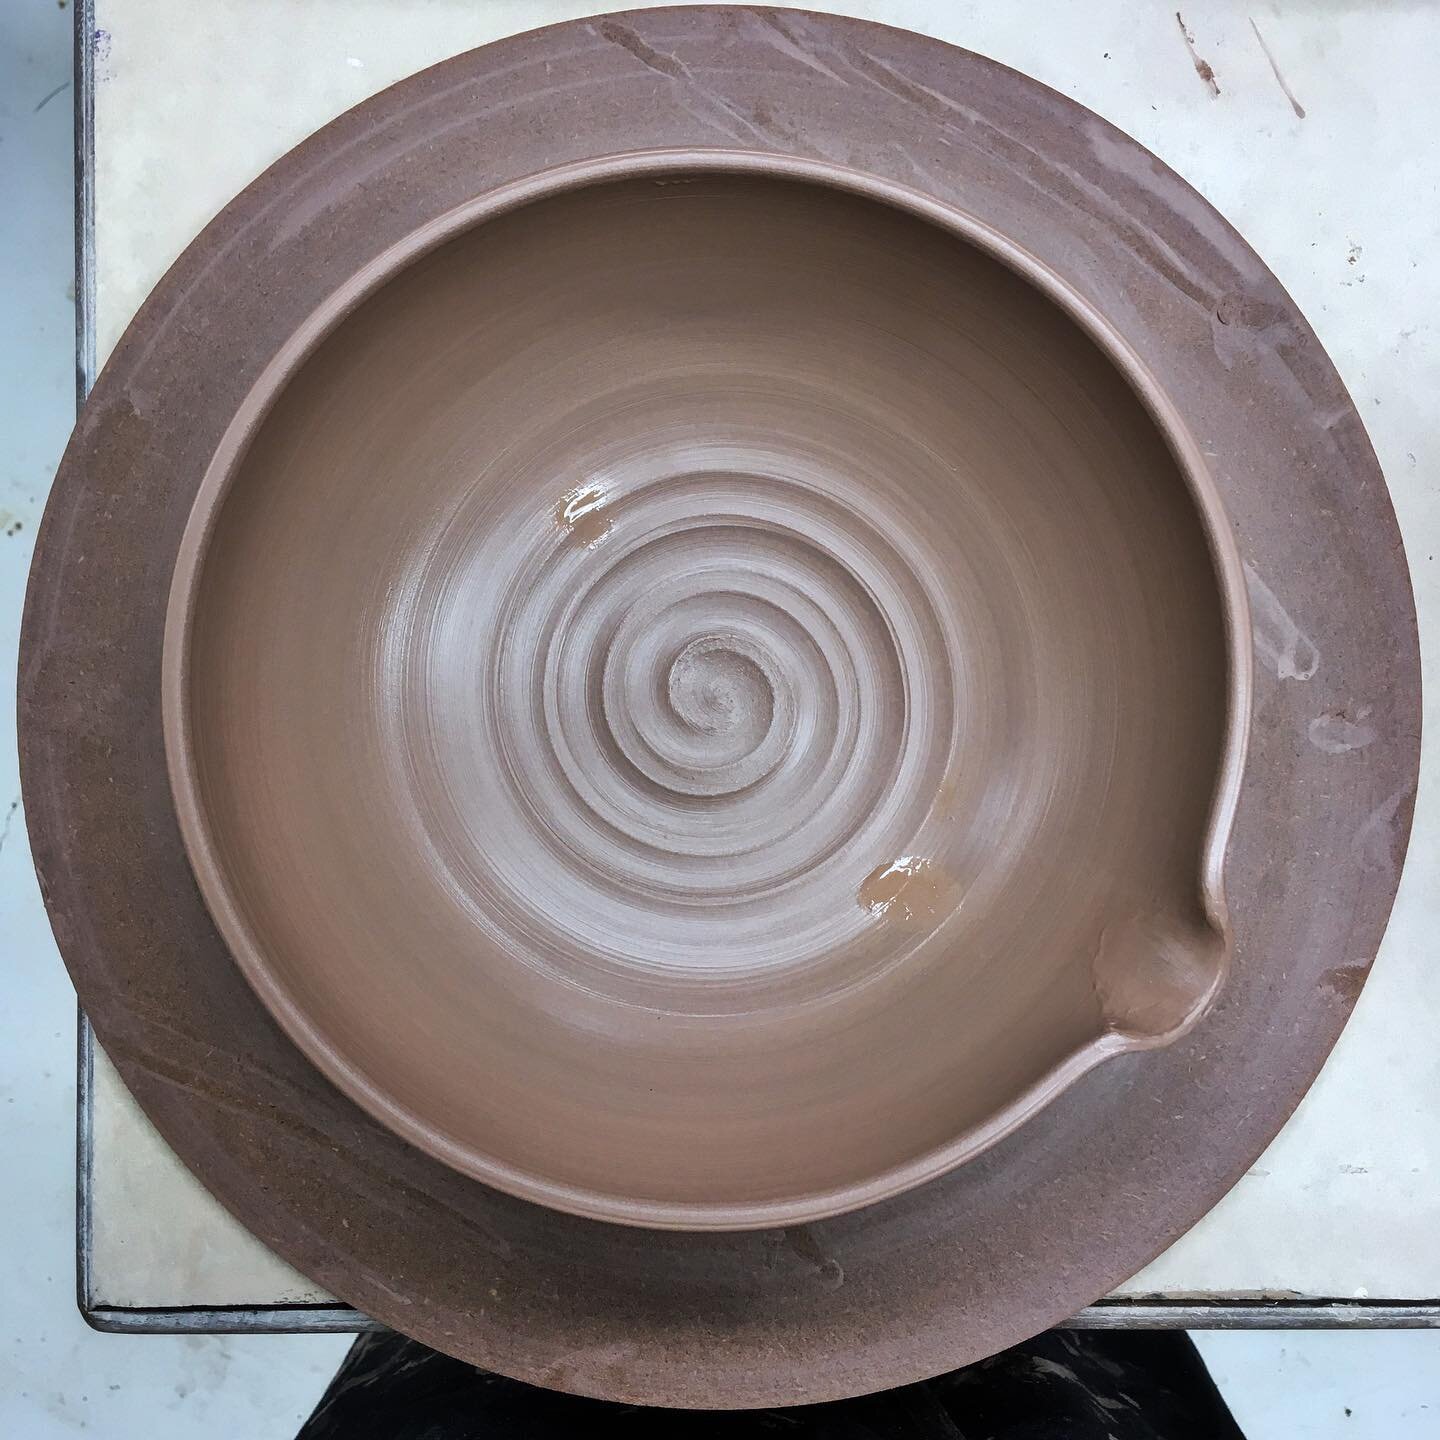 The last one of these I made slipped right out of my hands and shattered on the concrete floor when I was glazing it. So this is Take Two.

Freshly thrown pouring bowl&mdash;it&rsquo;ll get a big comfortable handle opposite the spout, and will be abo